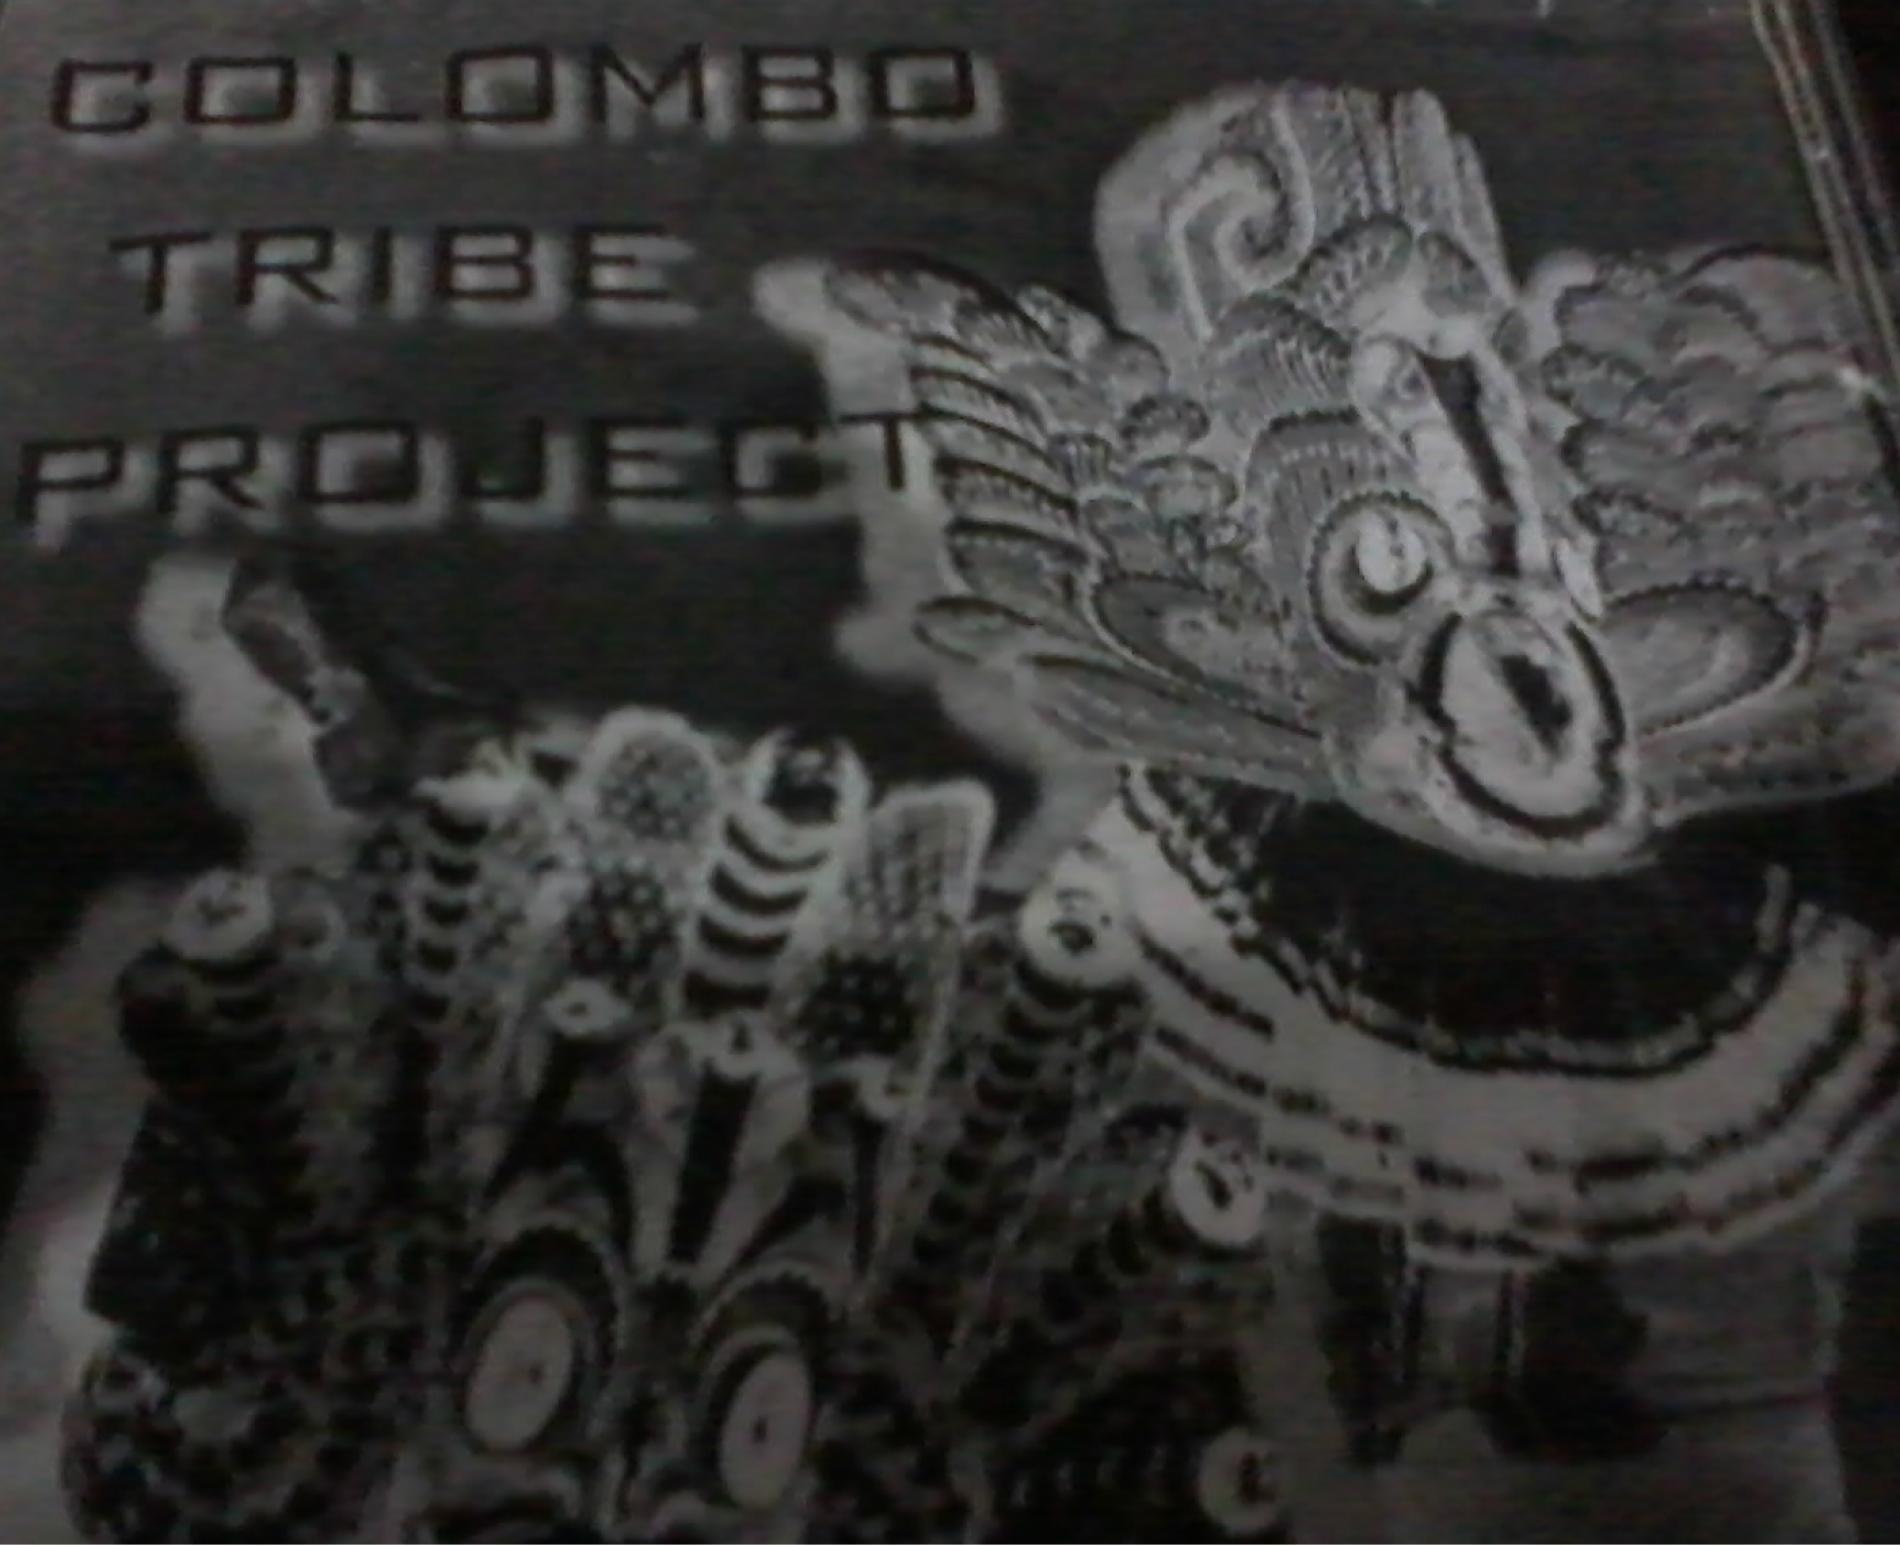 The Colombo Tribe Project Compliation